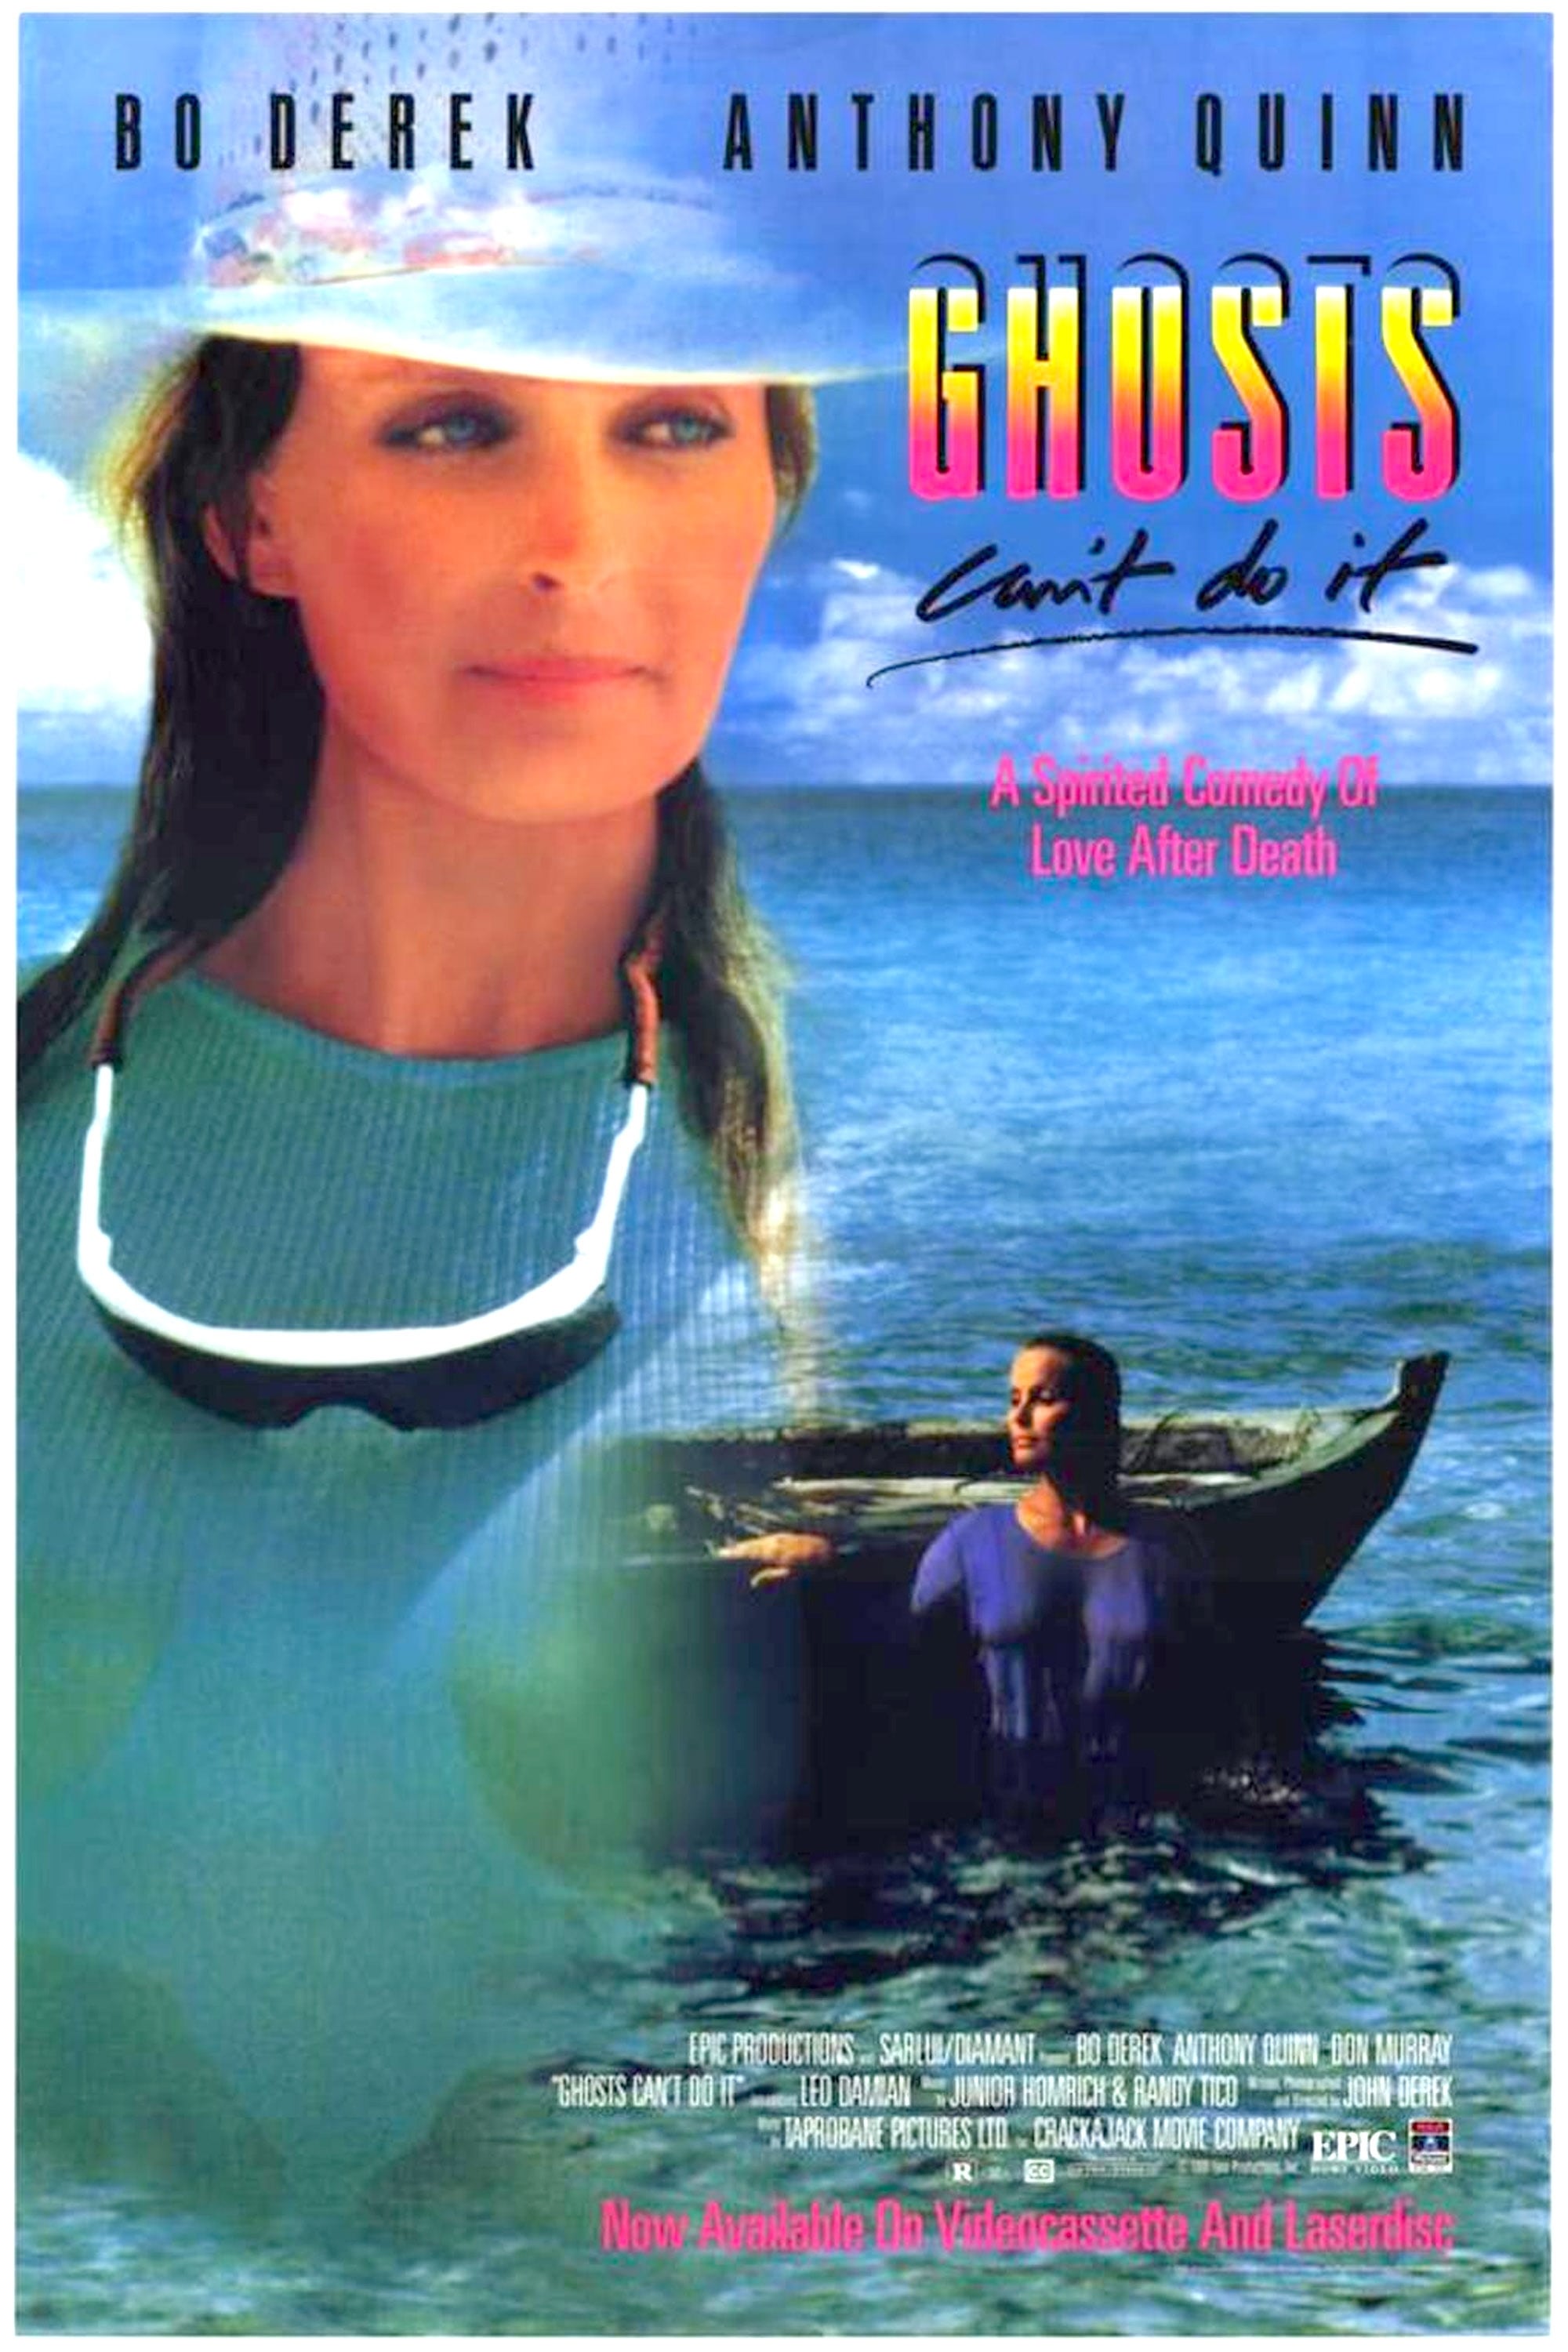 Ghosts Can't Do It (1989)